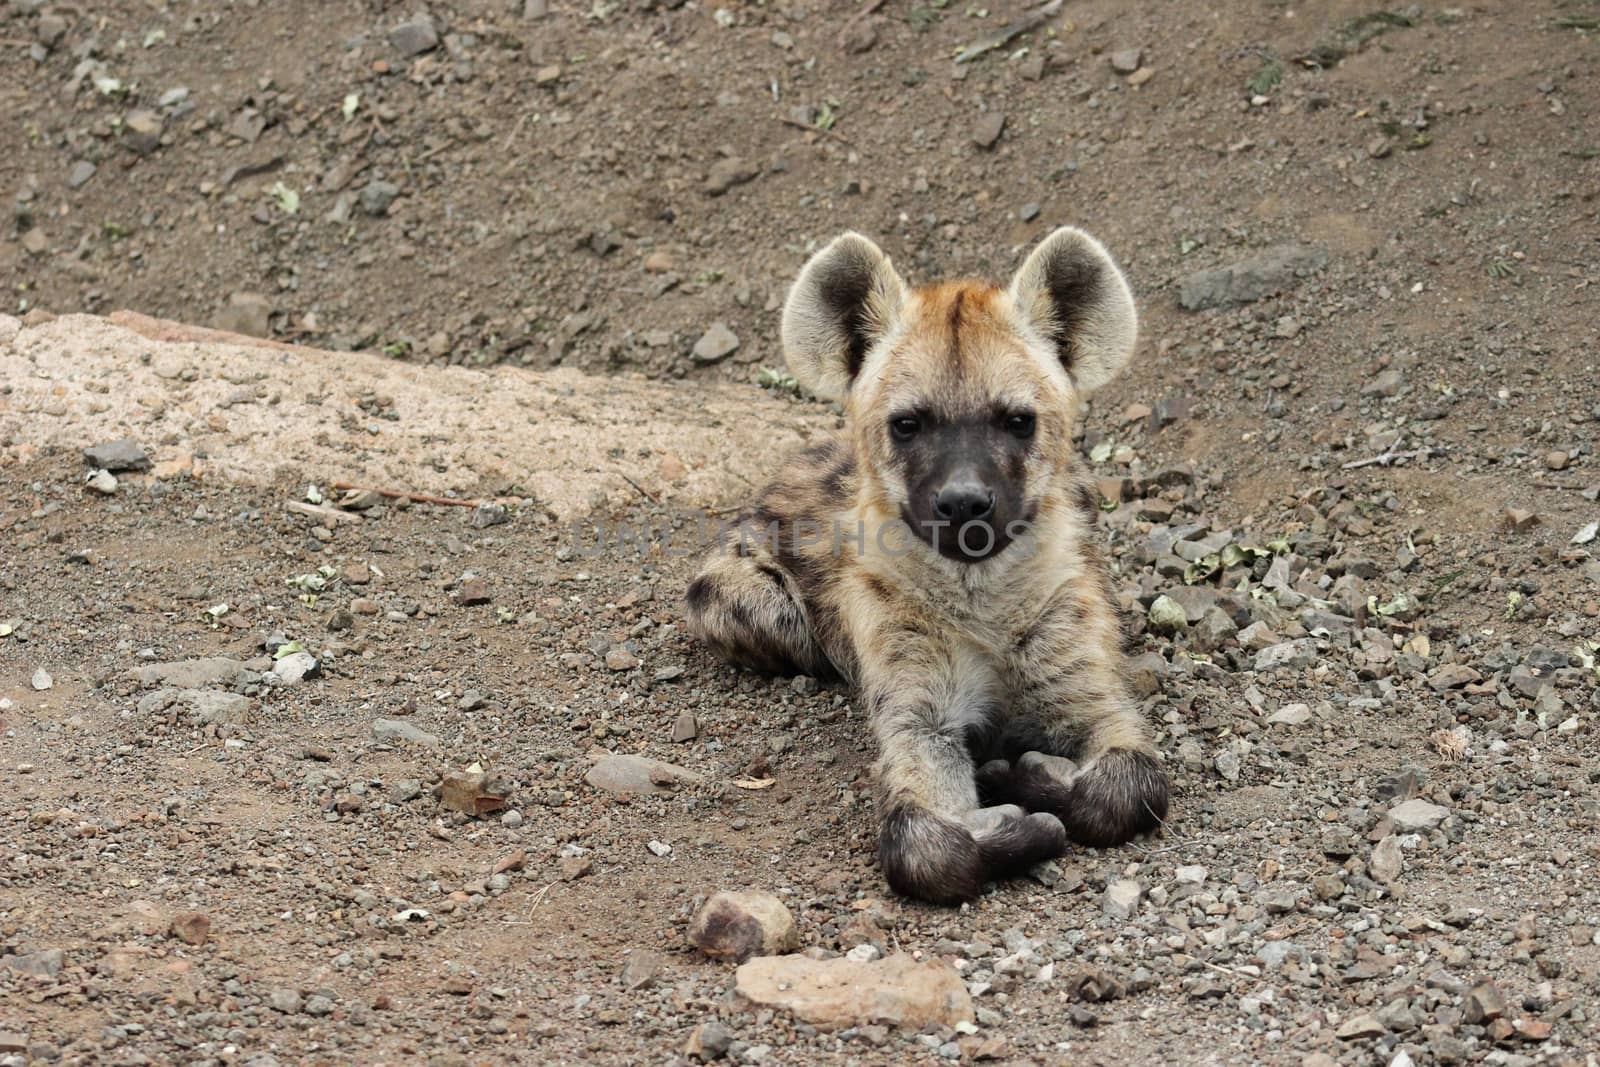 Spotted hyena cub on the side of road in kruger national park